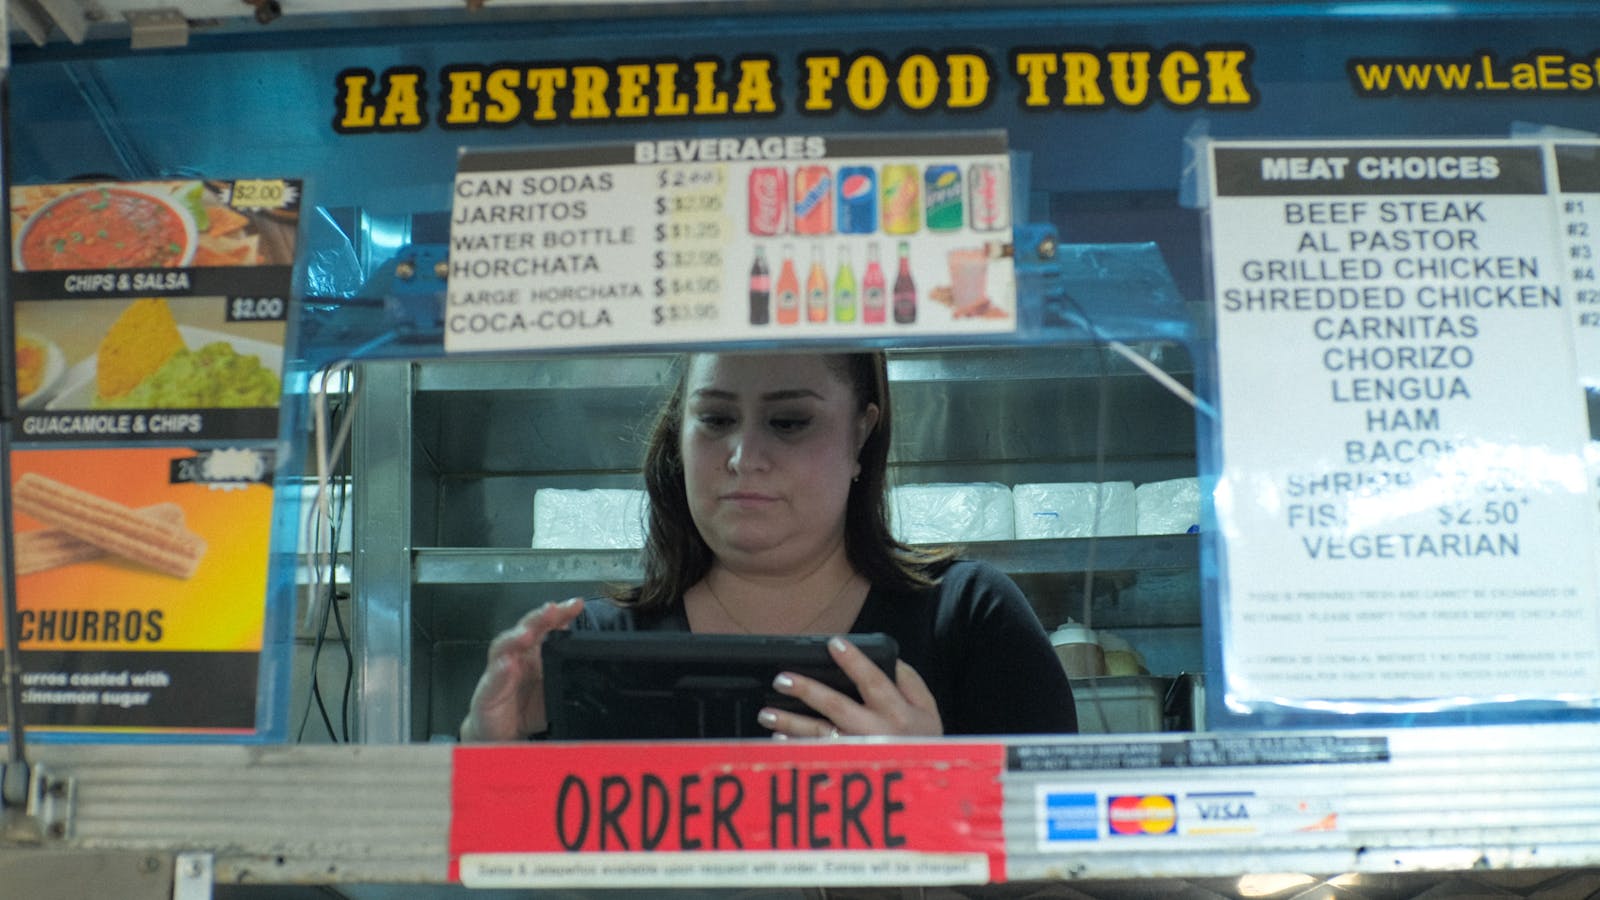 Otter's Restaurant Operating System being used in Taqueria La Estrella's food truck. 